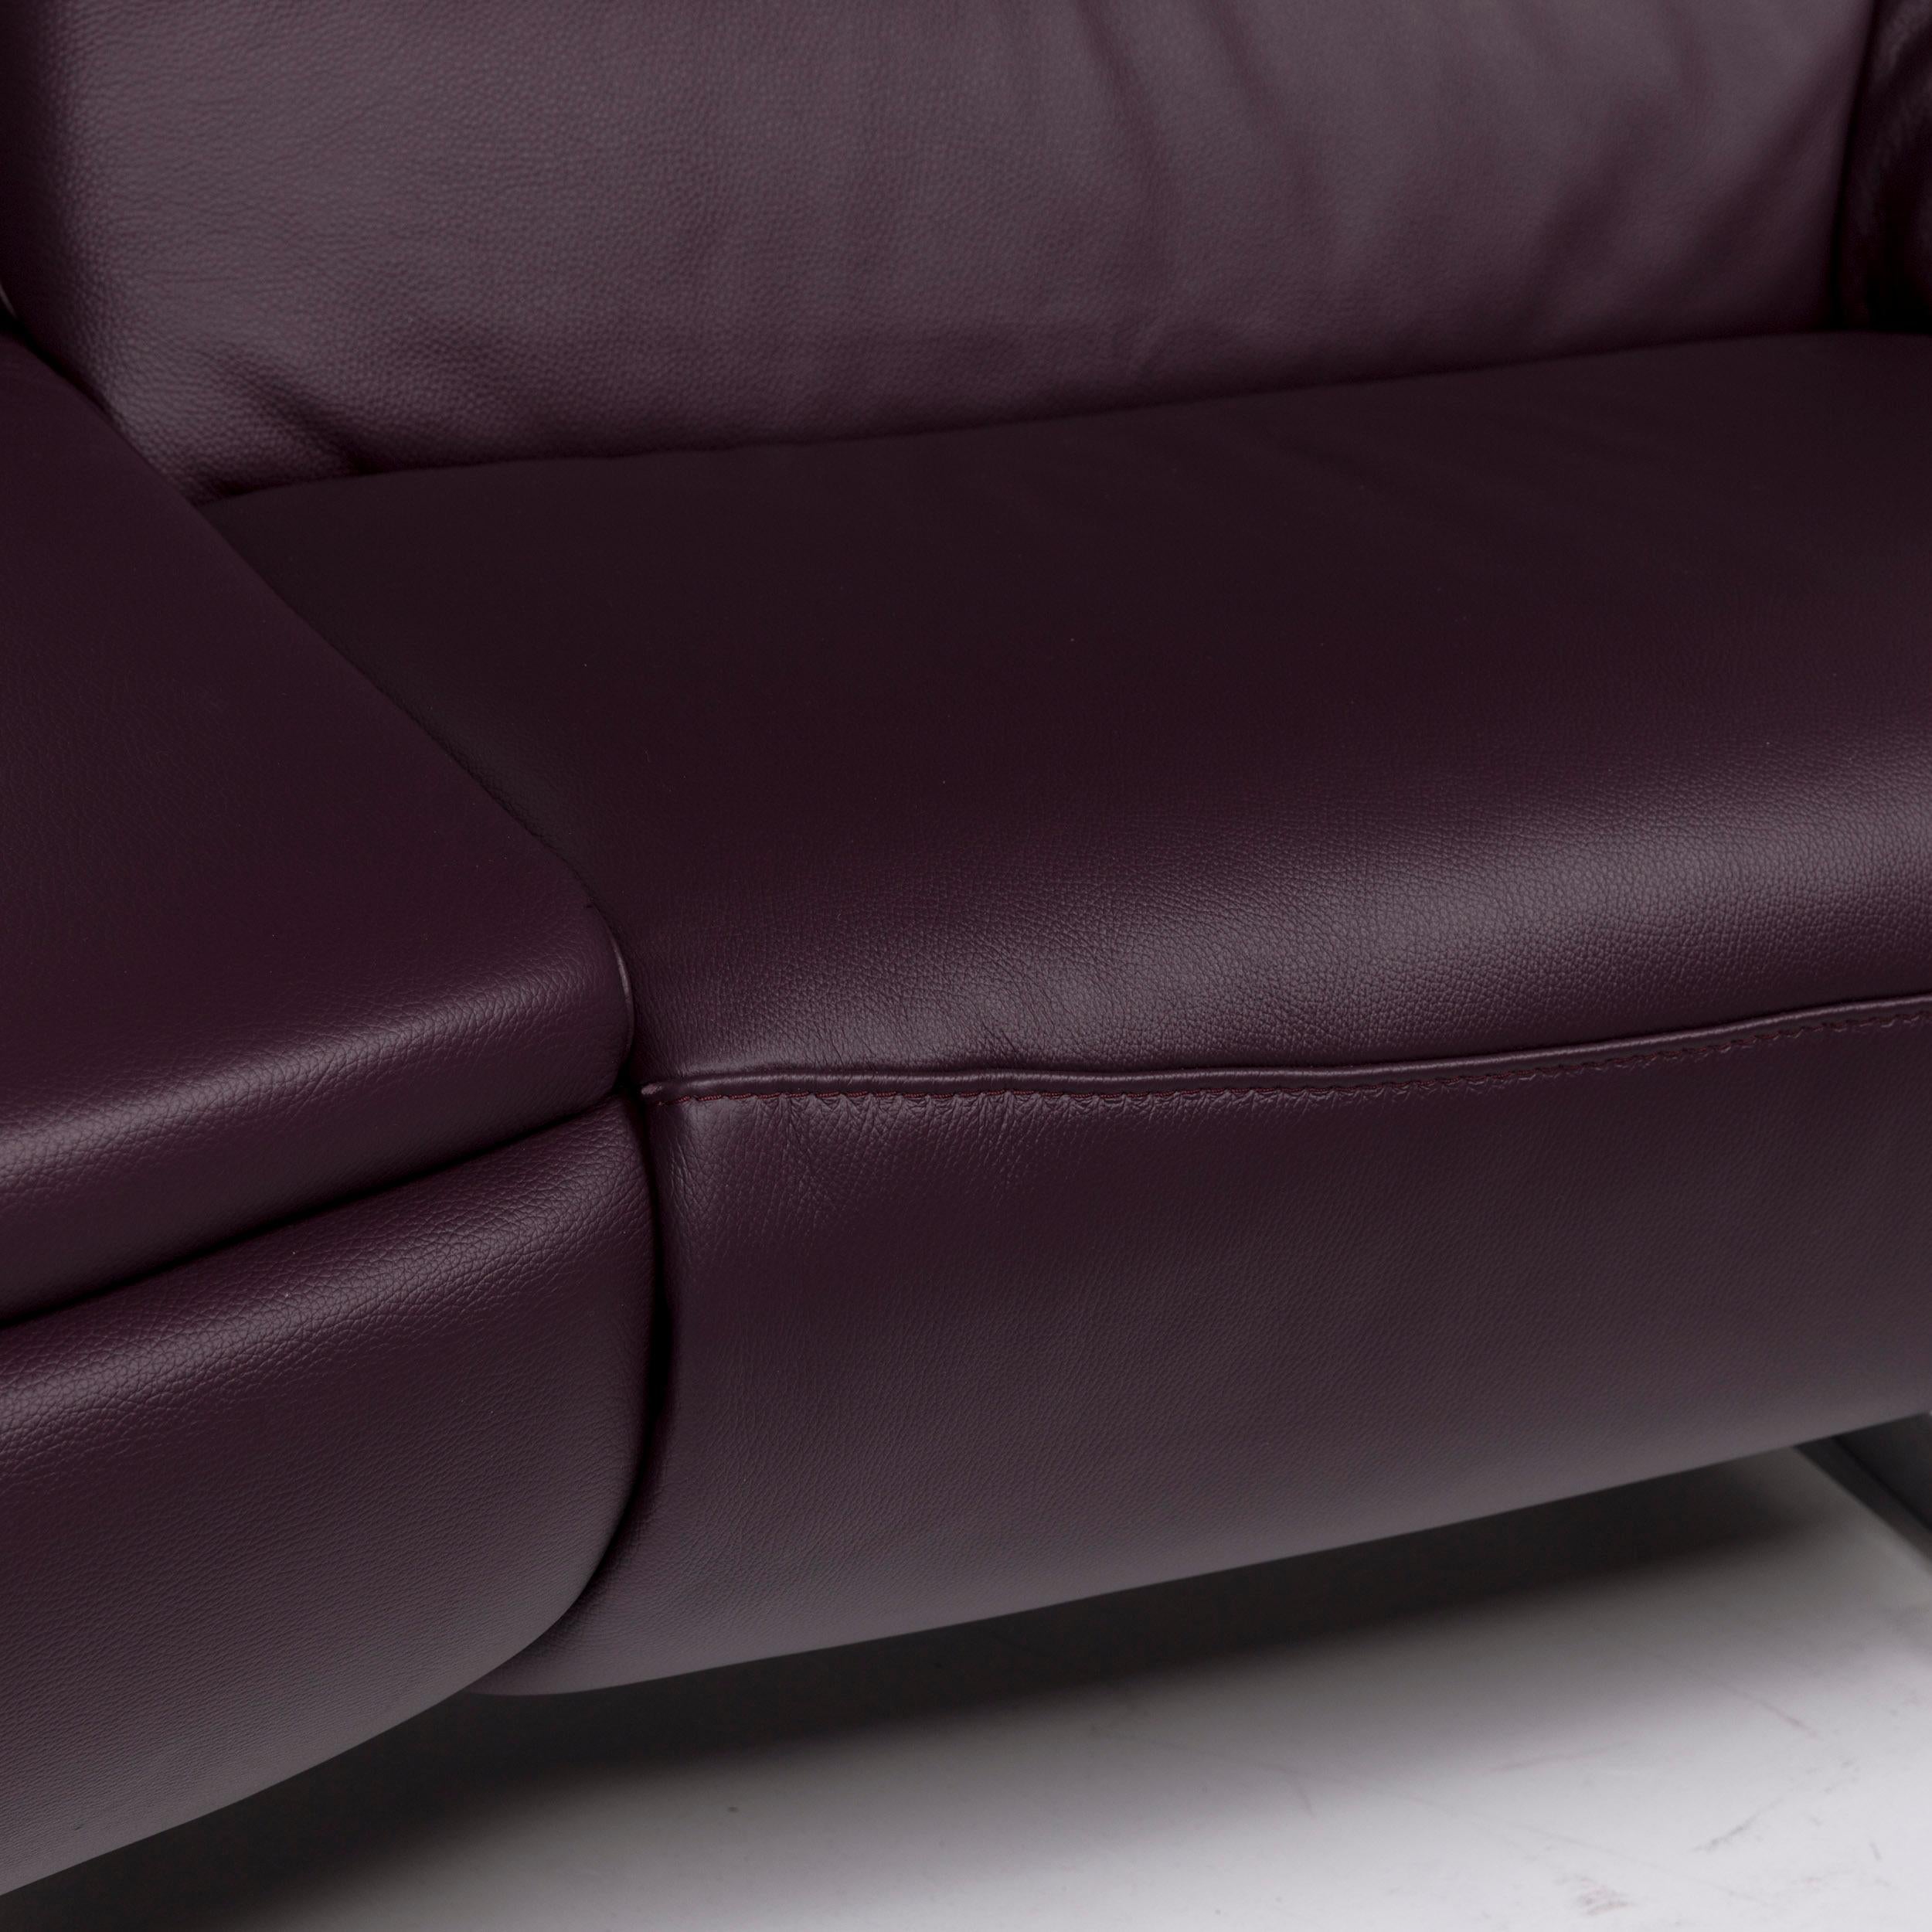 eggplant purple leather couch